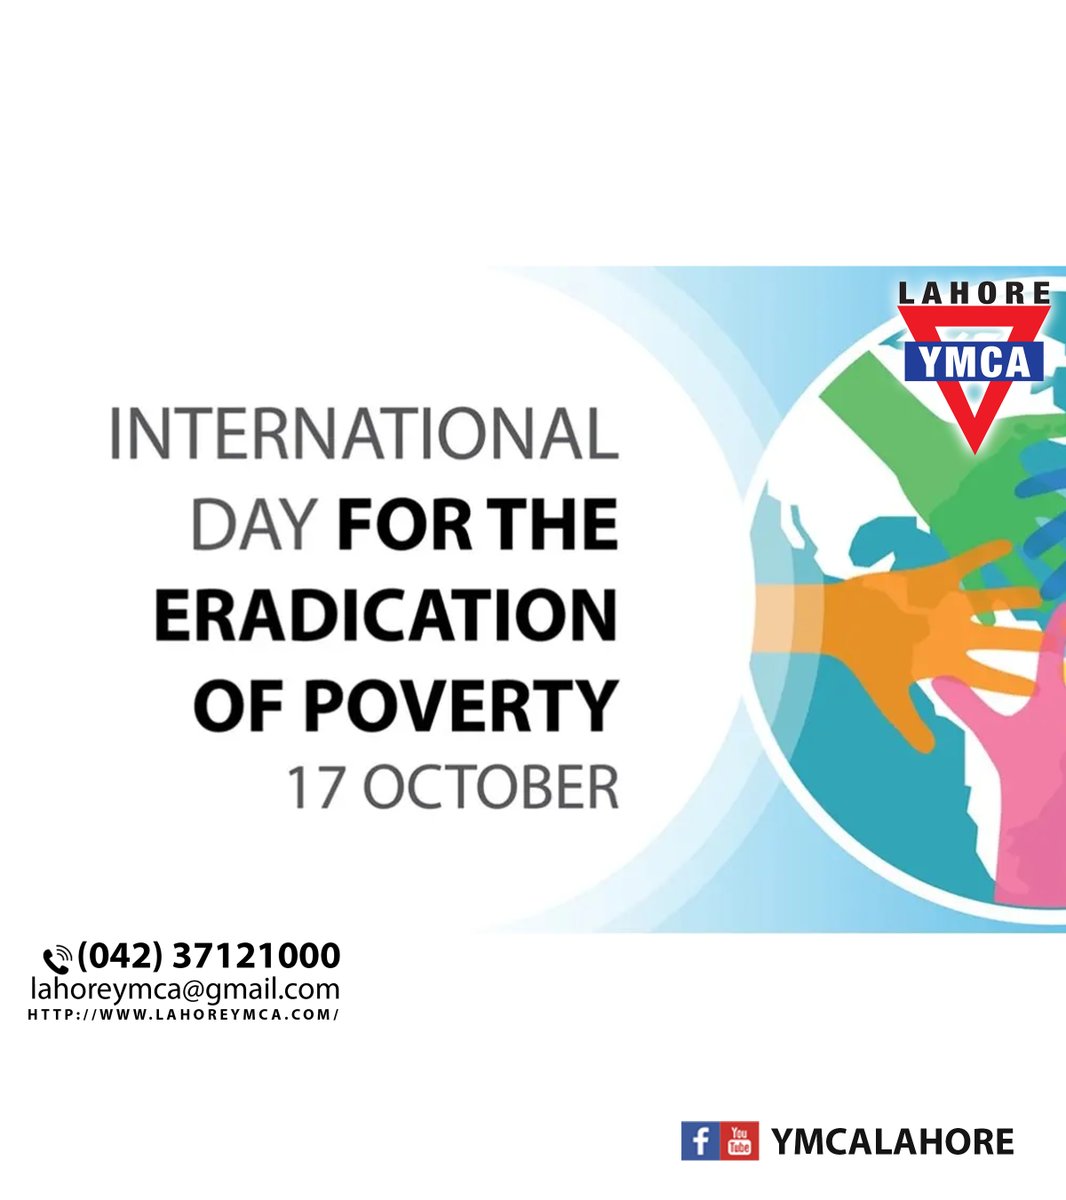 Together We Can End Poverty: International Day for the Eradication of Poverty#EndPoverty
#EradicatePoverty
#GlobalSolidarity
#PovertyAlleviation #ymcalahore